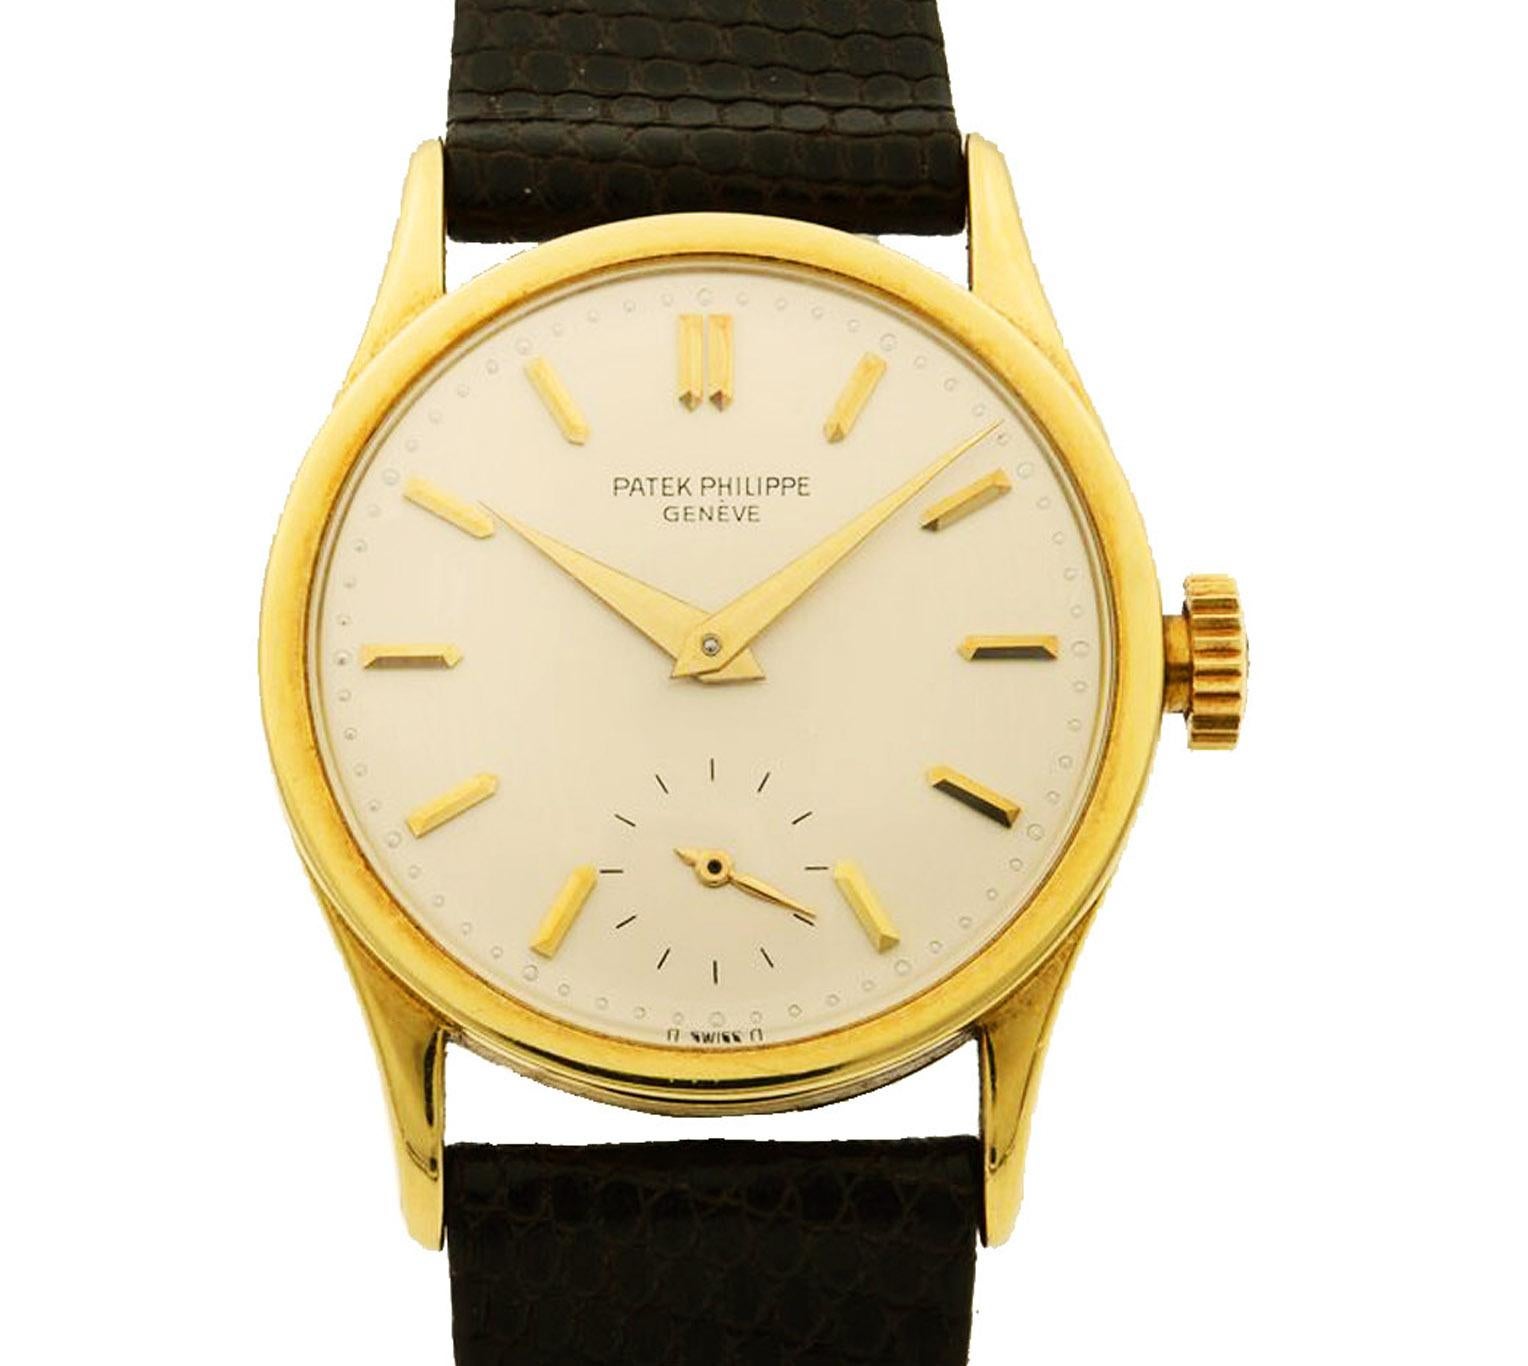 This pre-owned Patek Philippe Calatrava  3796J is a beautiful men's timepiece that is powered by mechanical (hand-winding) movement which is cased in a yellow gold case. It has a round shape face,  dial and has hand sticks style markers. It is